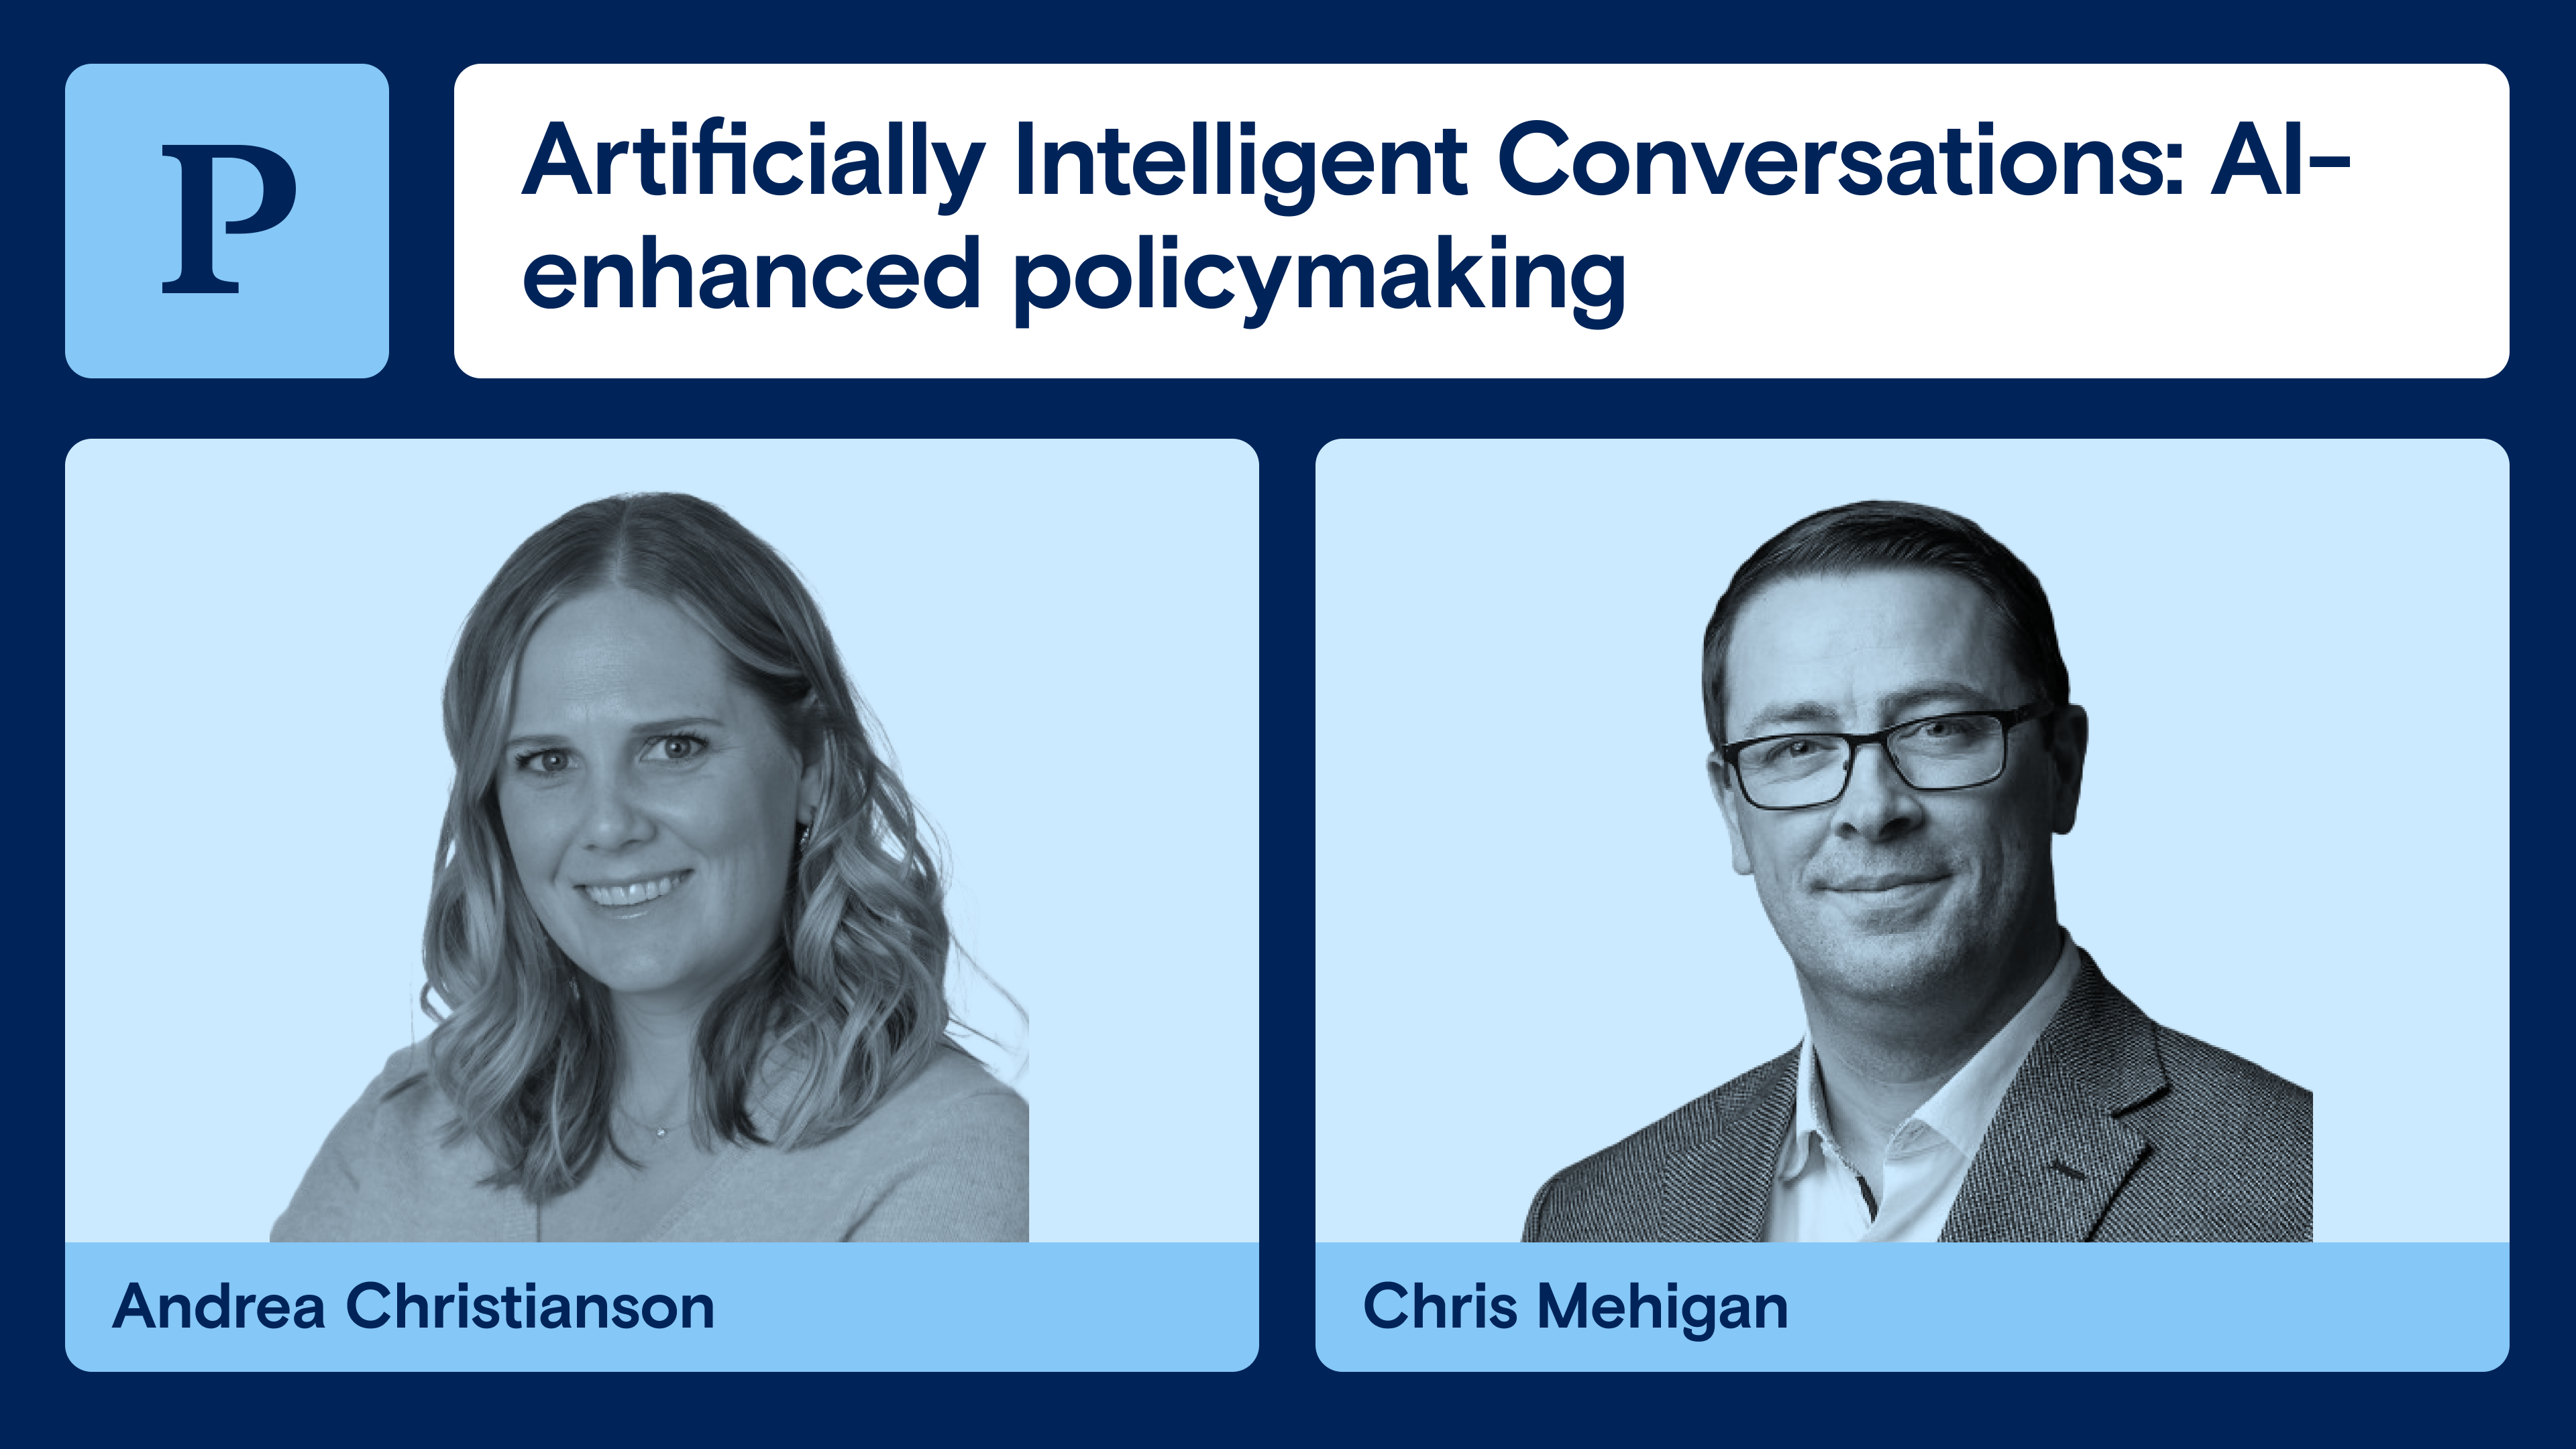 Artificially Intelligent Conversations: AI-enhanced policymaking